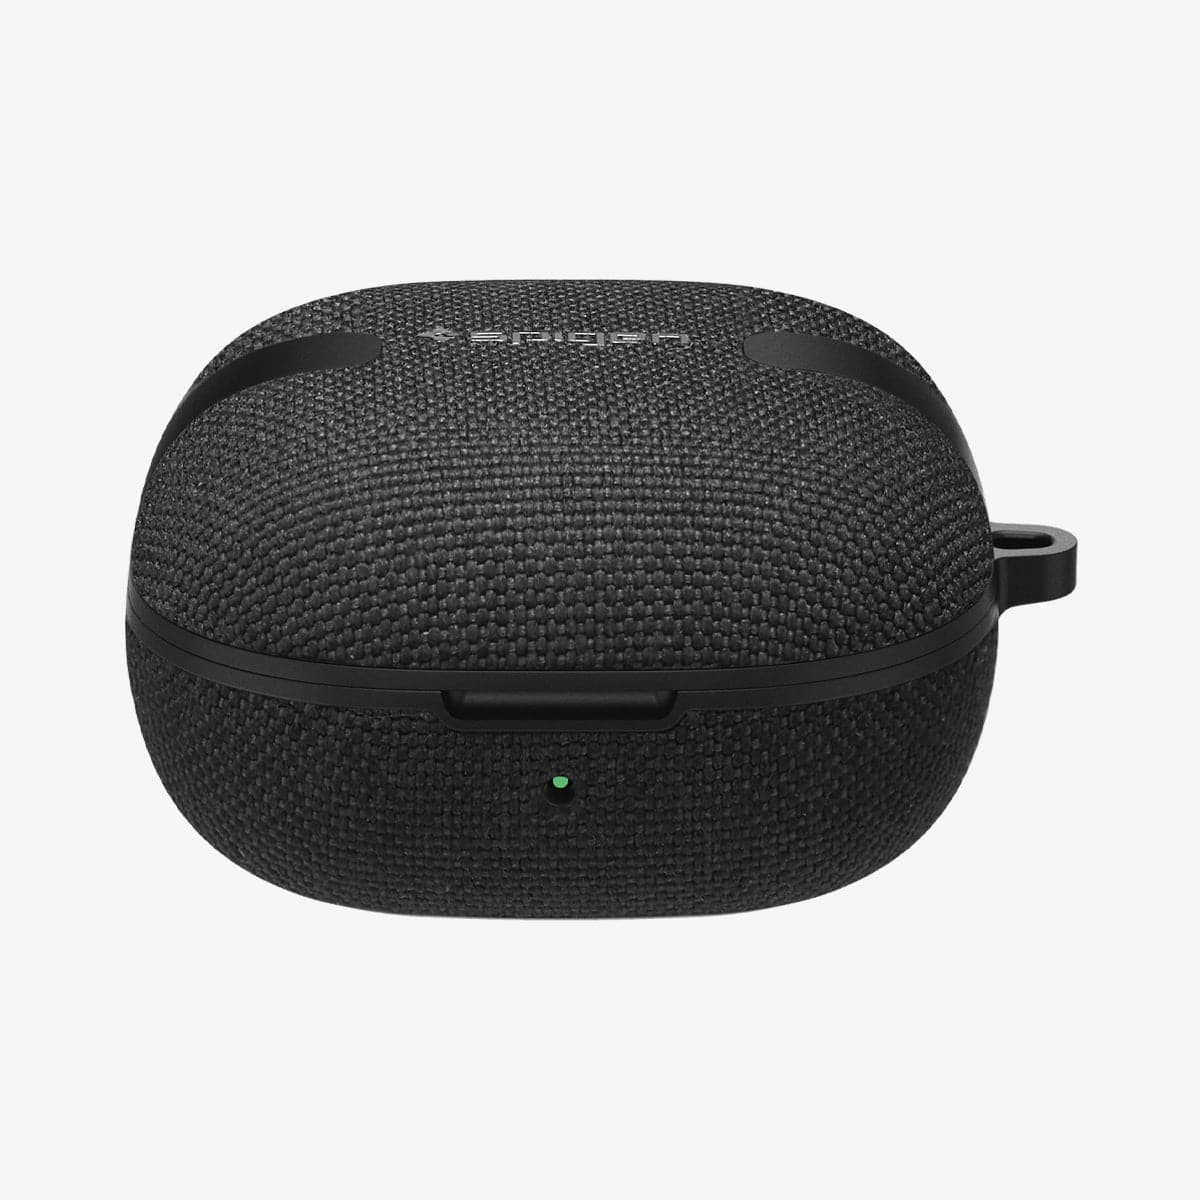 ASD01278 - Galaxy Buds 2 Pro / 2 / Pro / Live Case Urban Fit in black showing the front and partial top